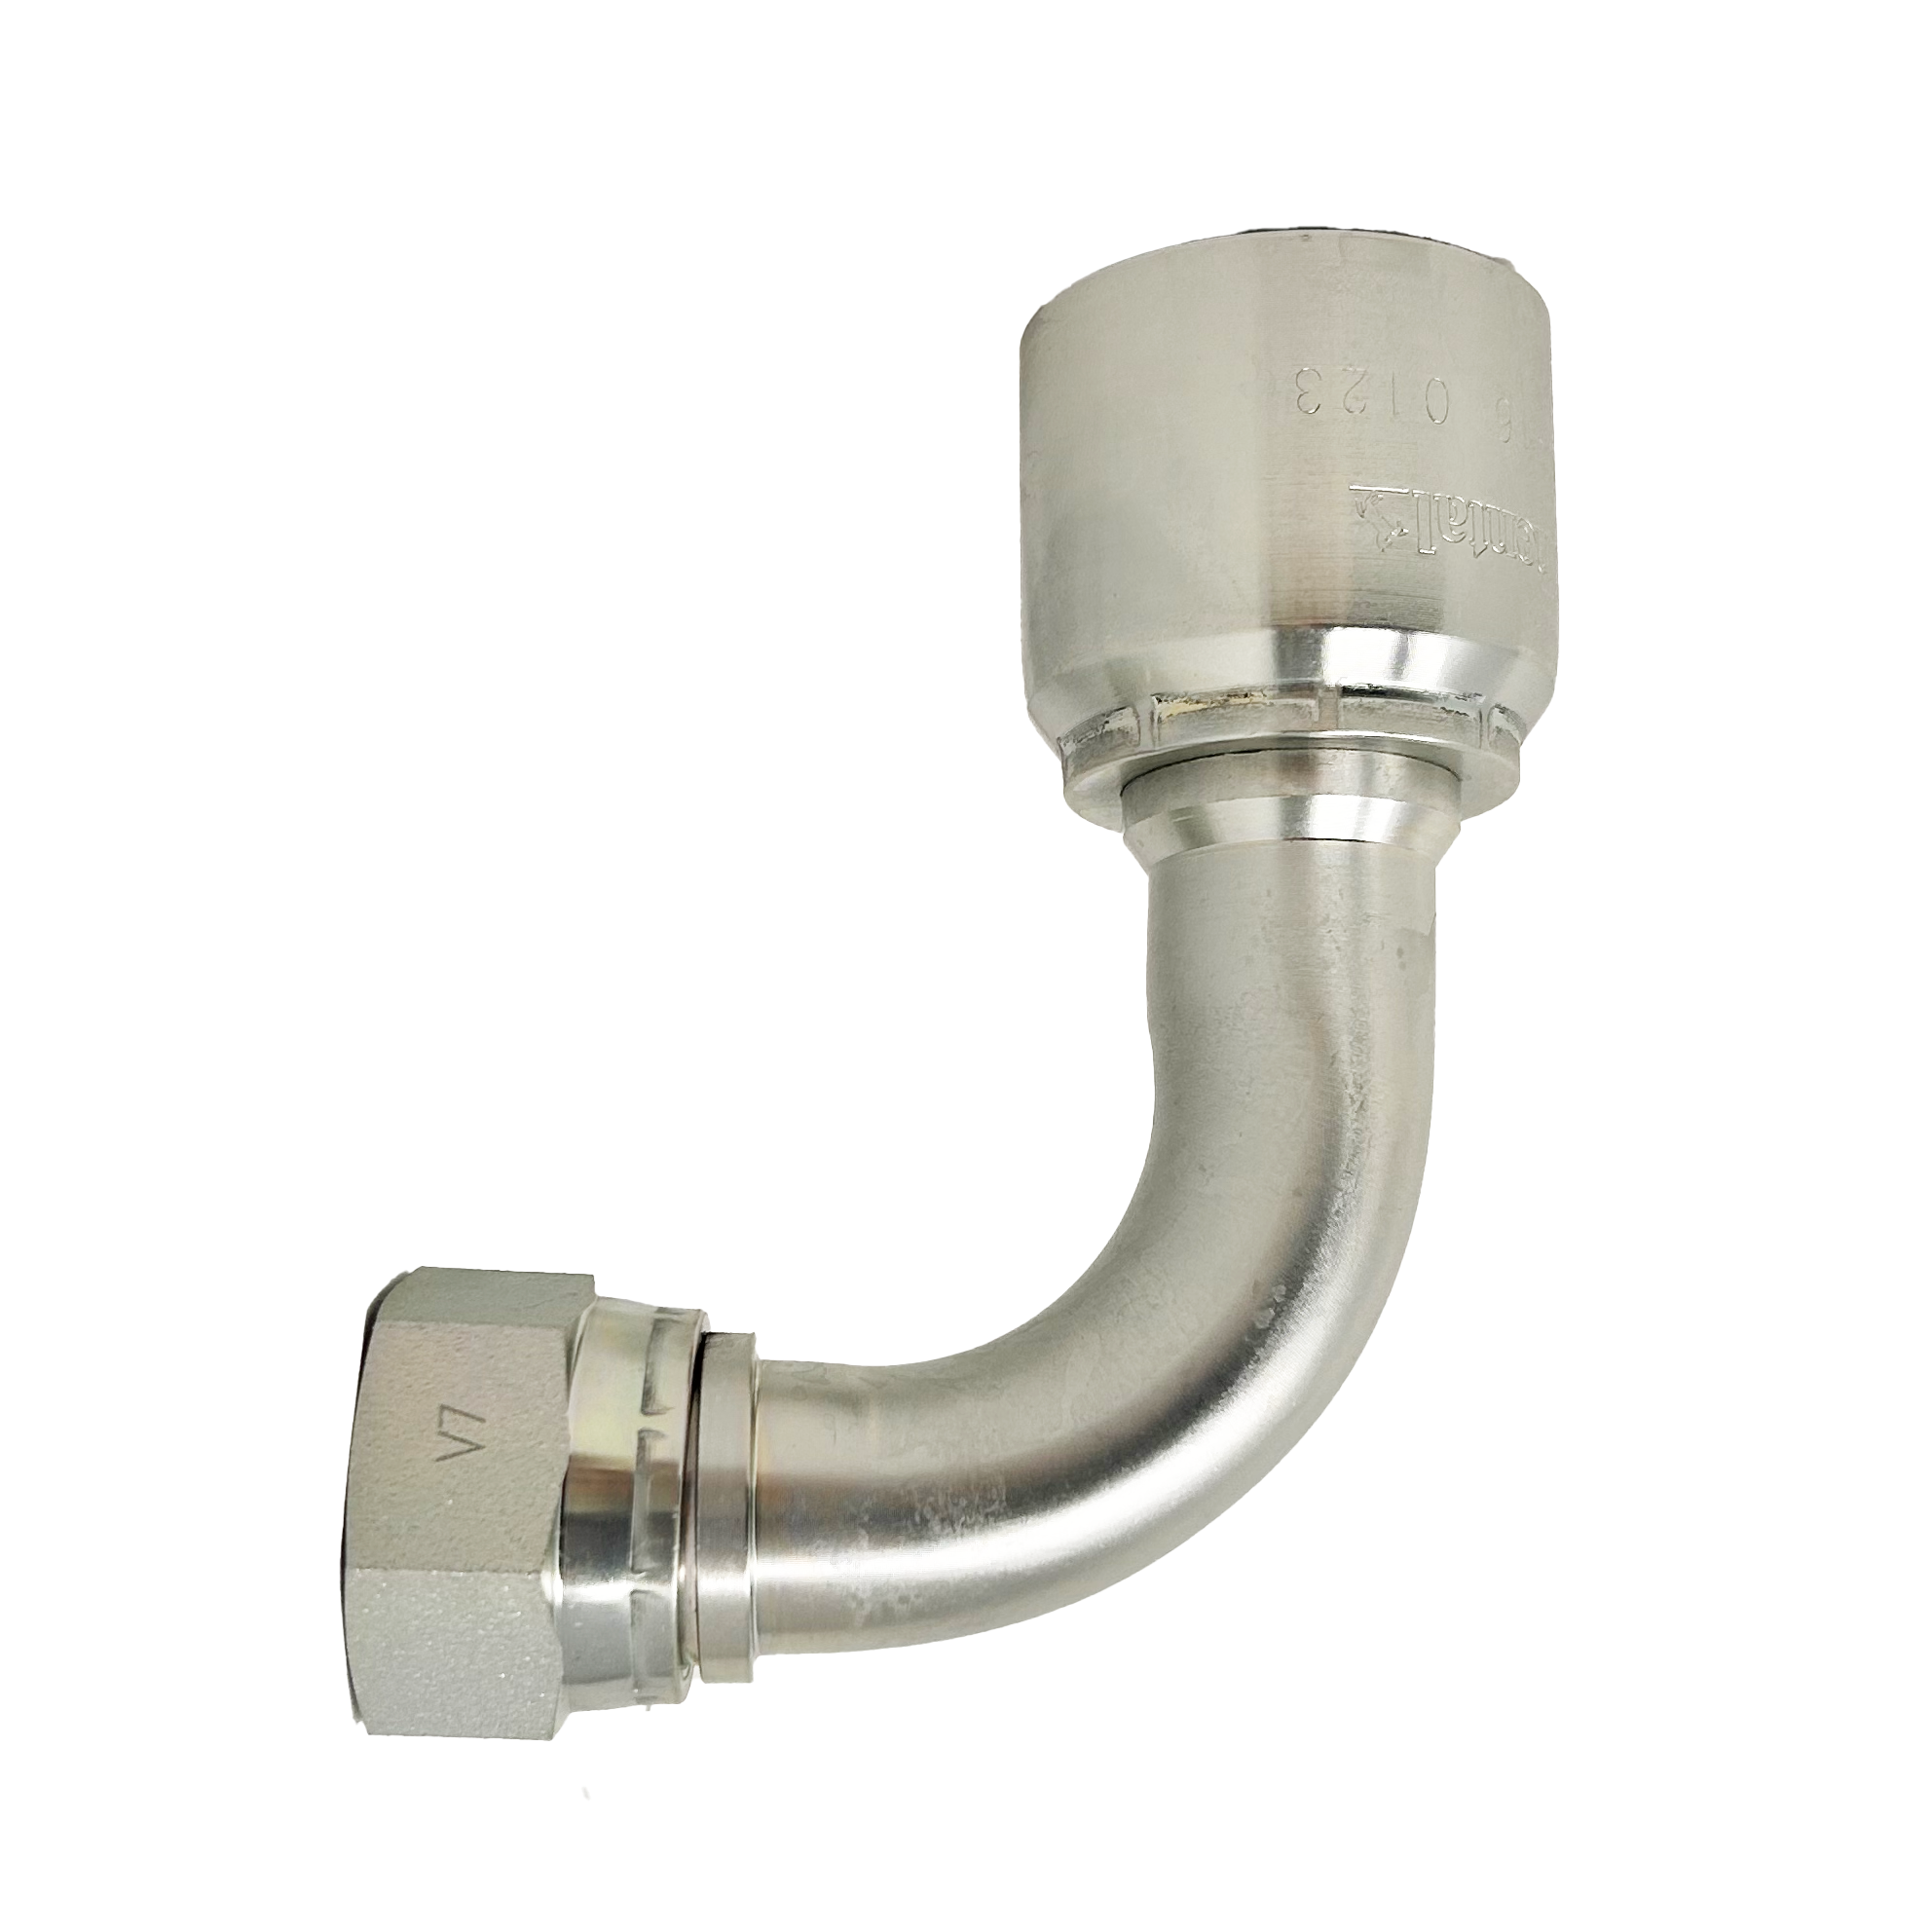 B2-JCFX90-2024: Continental Hose Fitting, 1.25 (1-1/4") Hose ID x 1-7/8-12 Female JIC, 90-Degree Swivel Connection